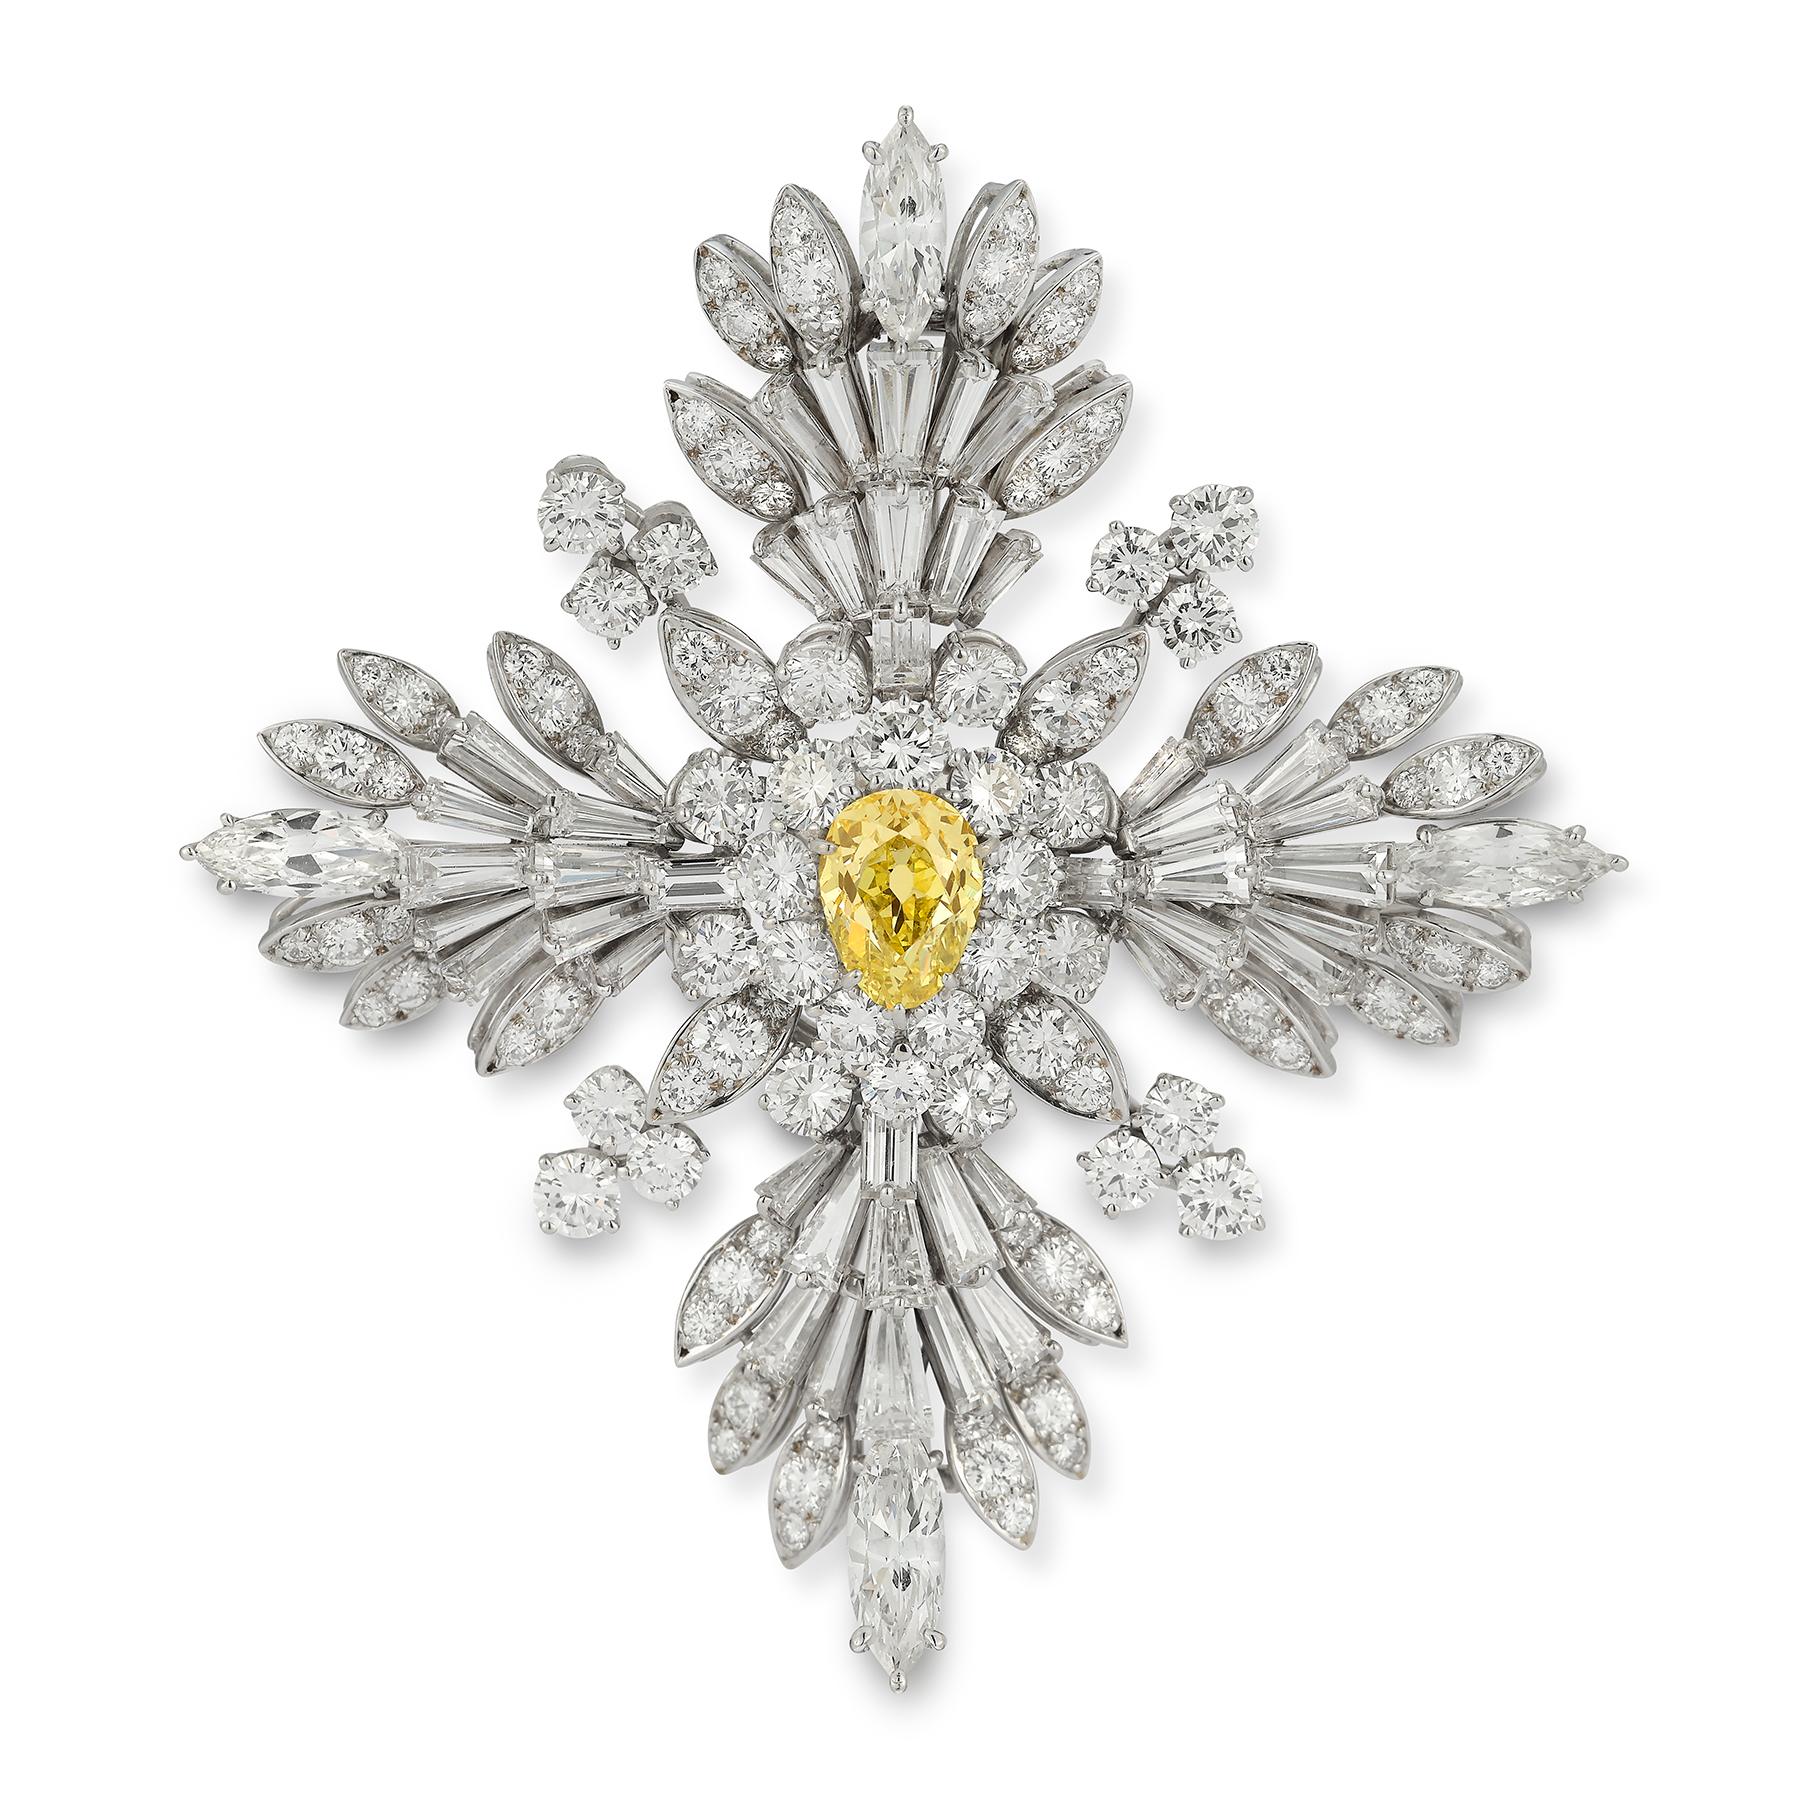 Van Cleef and Arpels Fancy Intense Yellow Diamond Maltese Cross
 Brooch
A fancy yellow old mine pear shape center diamond surrounded by round, marquise & baguette cut diamonds set in platinum.

Center old mine pear shape yellow diamond weight: